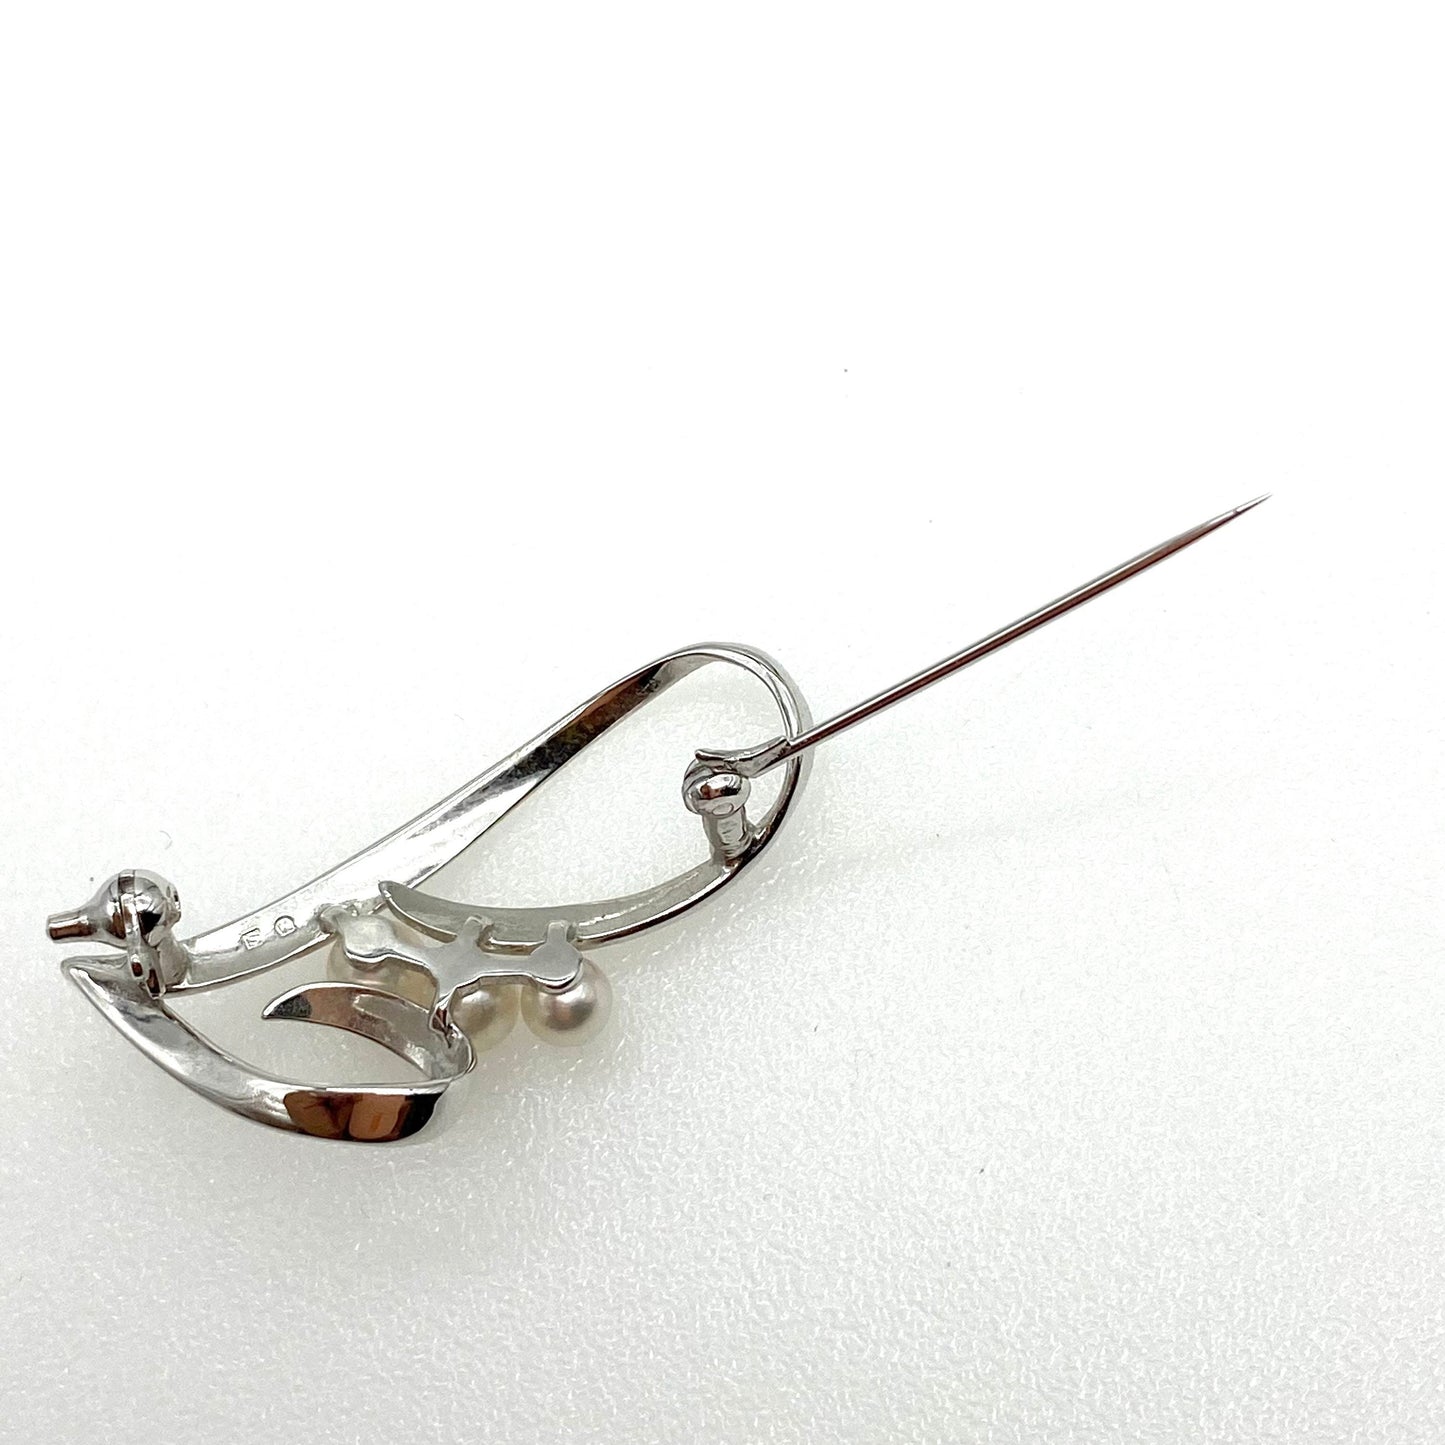 Mikimoto Silver and Pearl Brooch